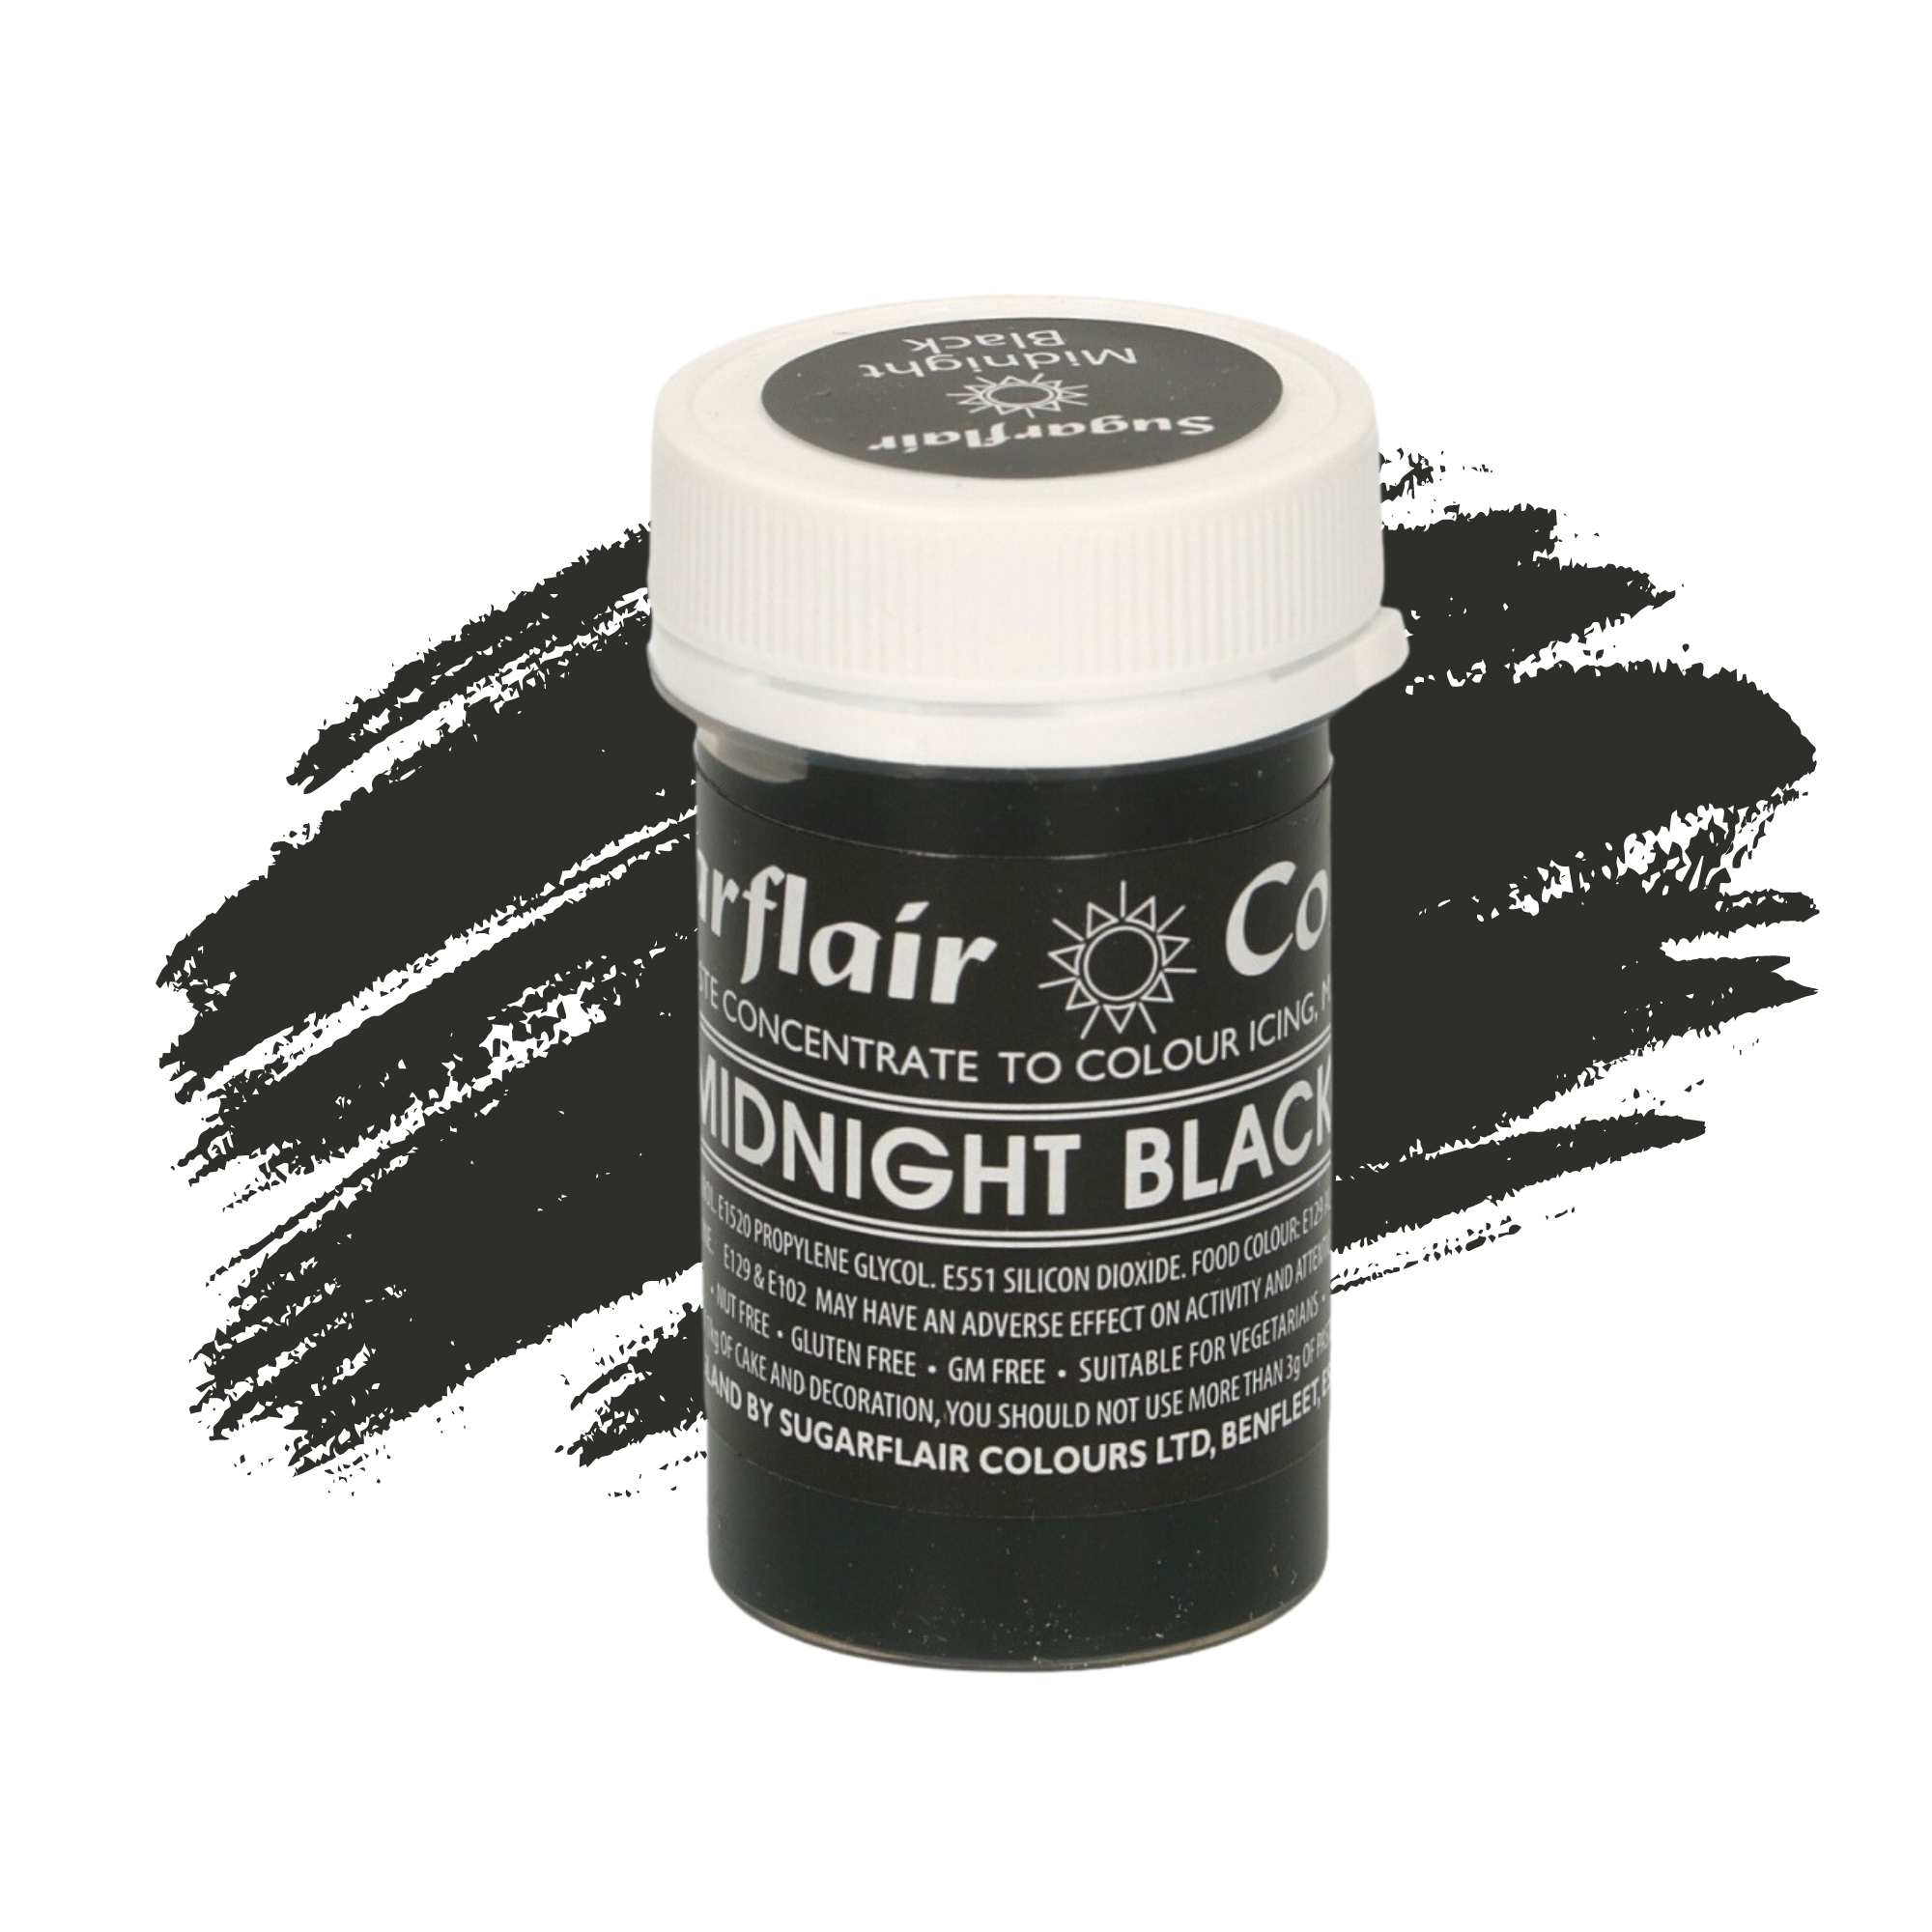 Sugarflair Paste Colours Concentrated Food Colouring - Pastel Midnight Black - 25g